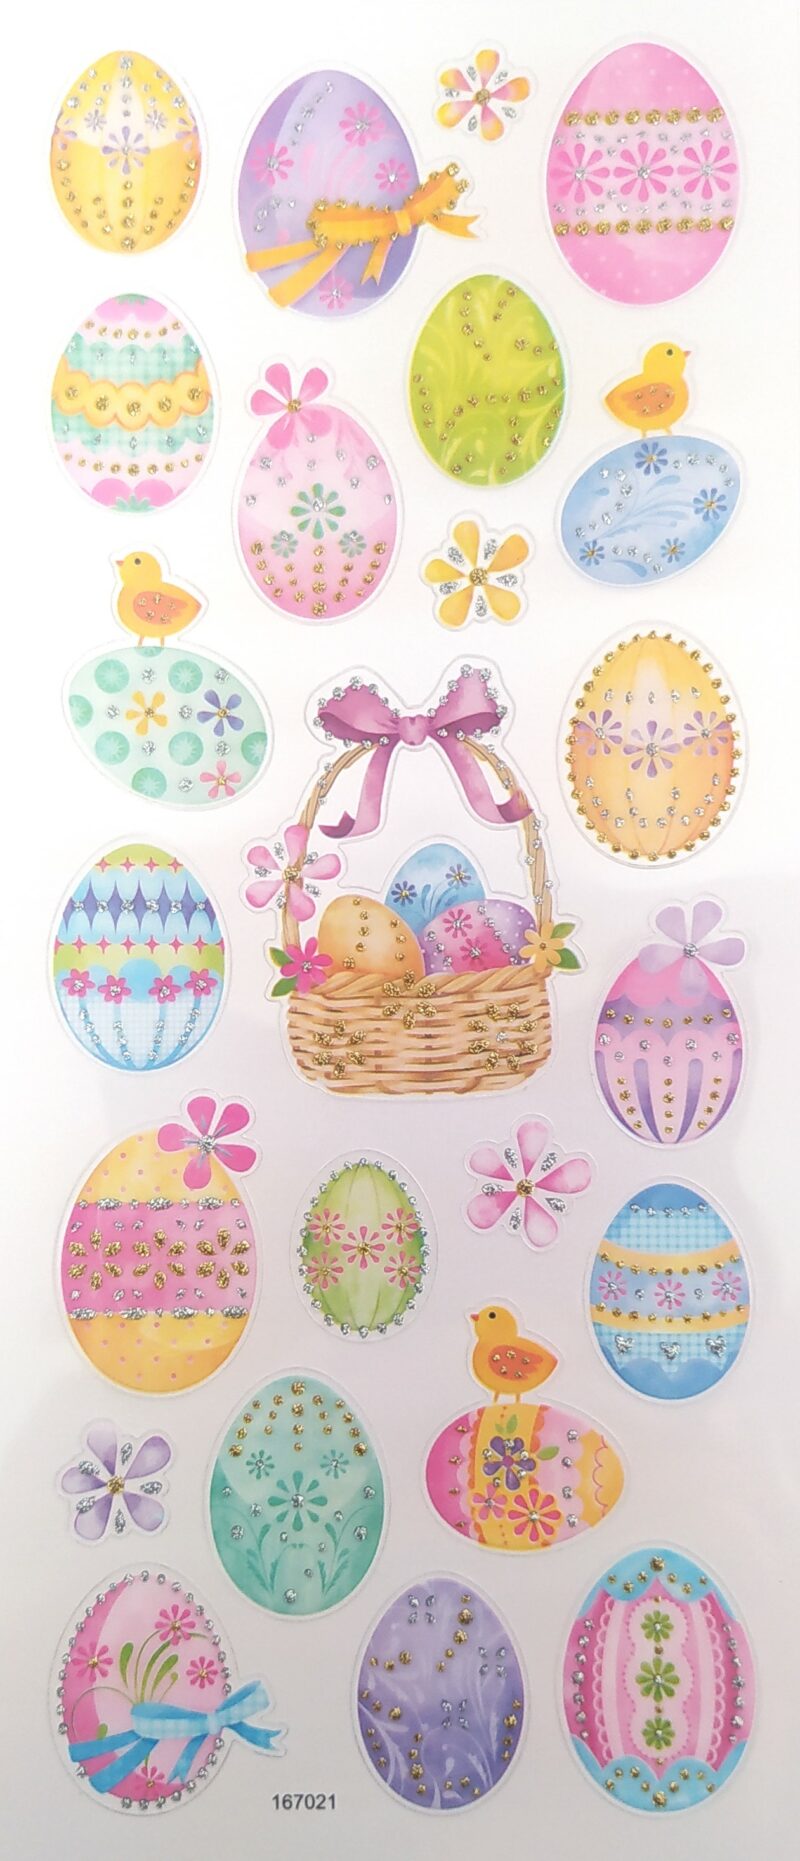 EASTER LUXURY STICKERS - EGGS 471816716700X